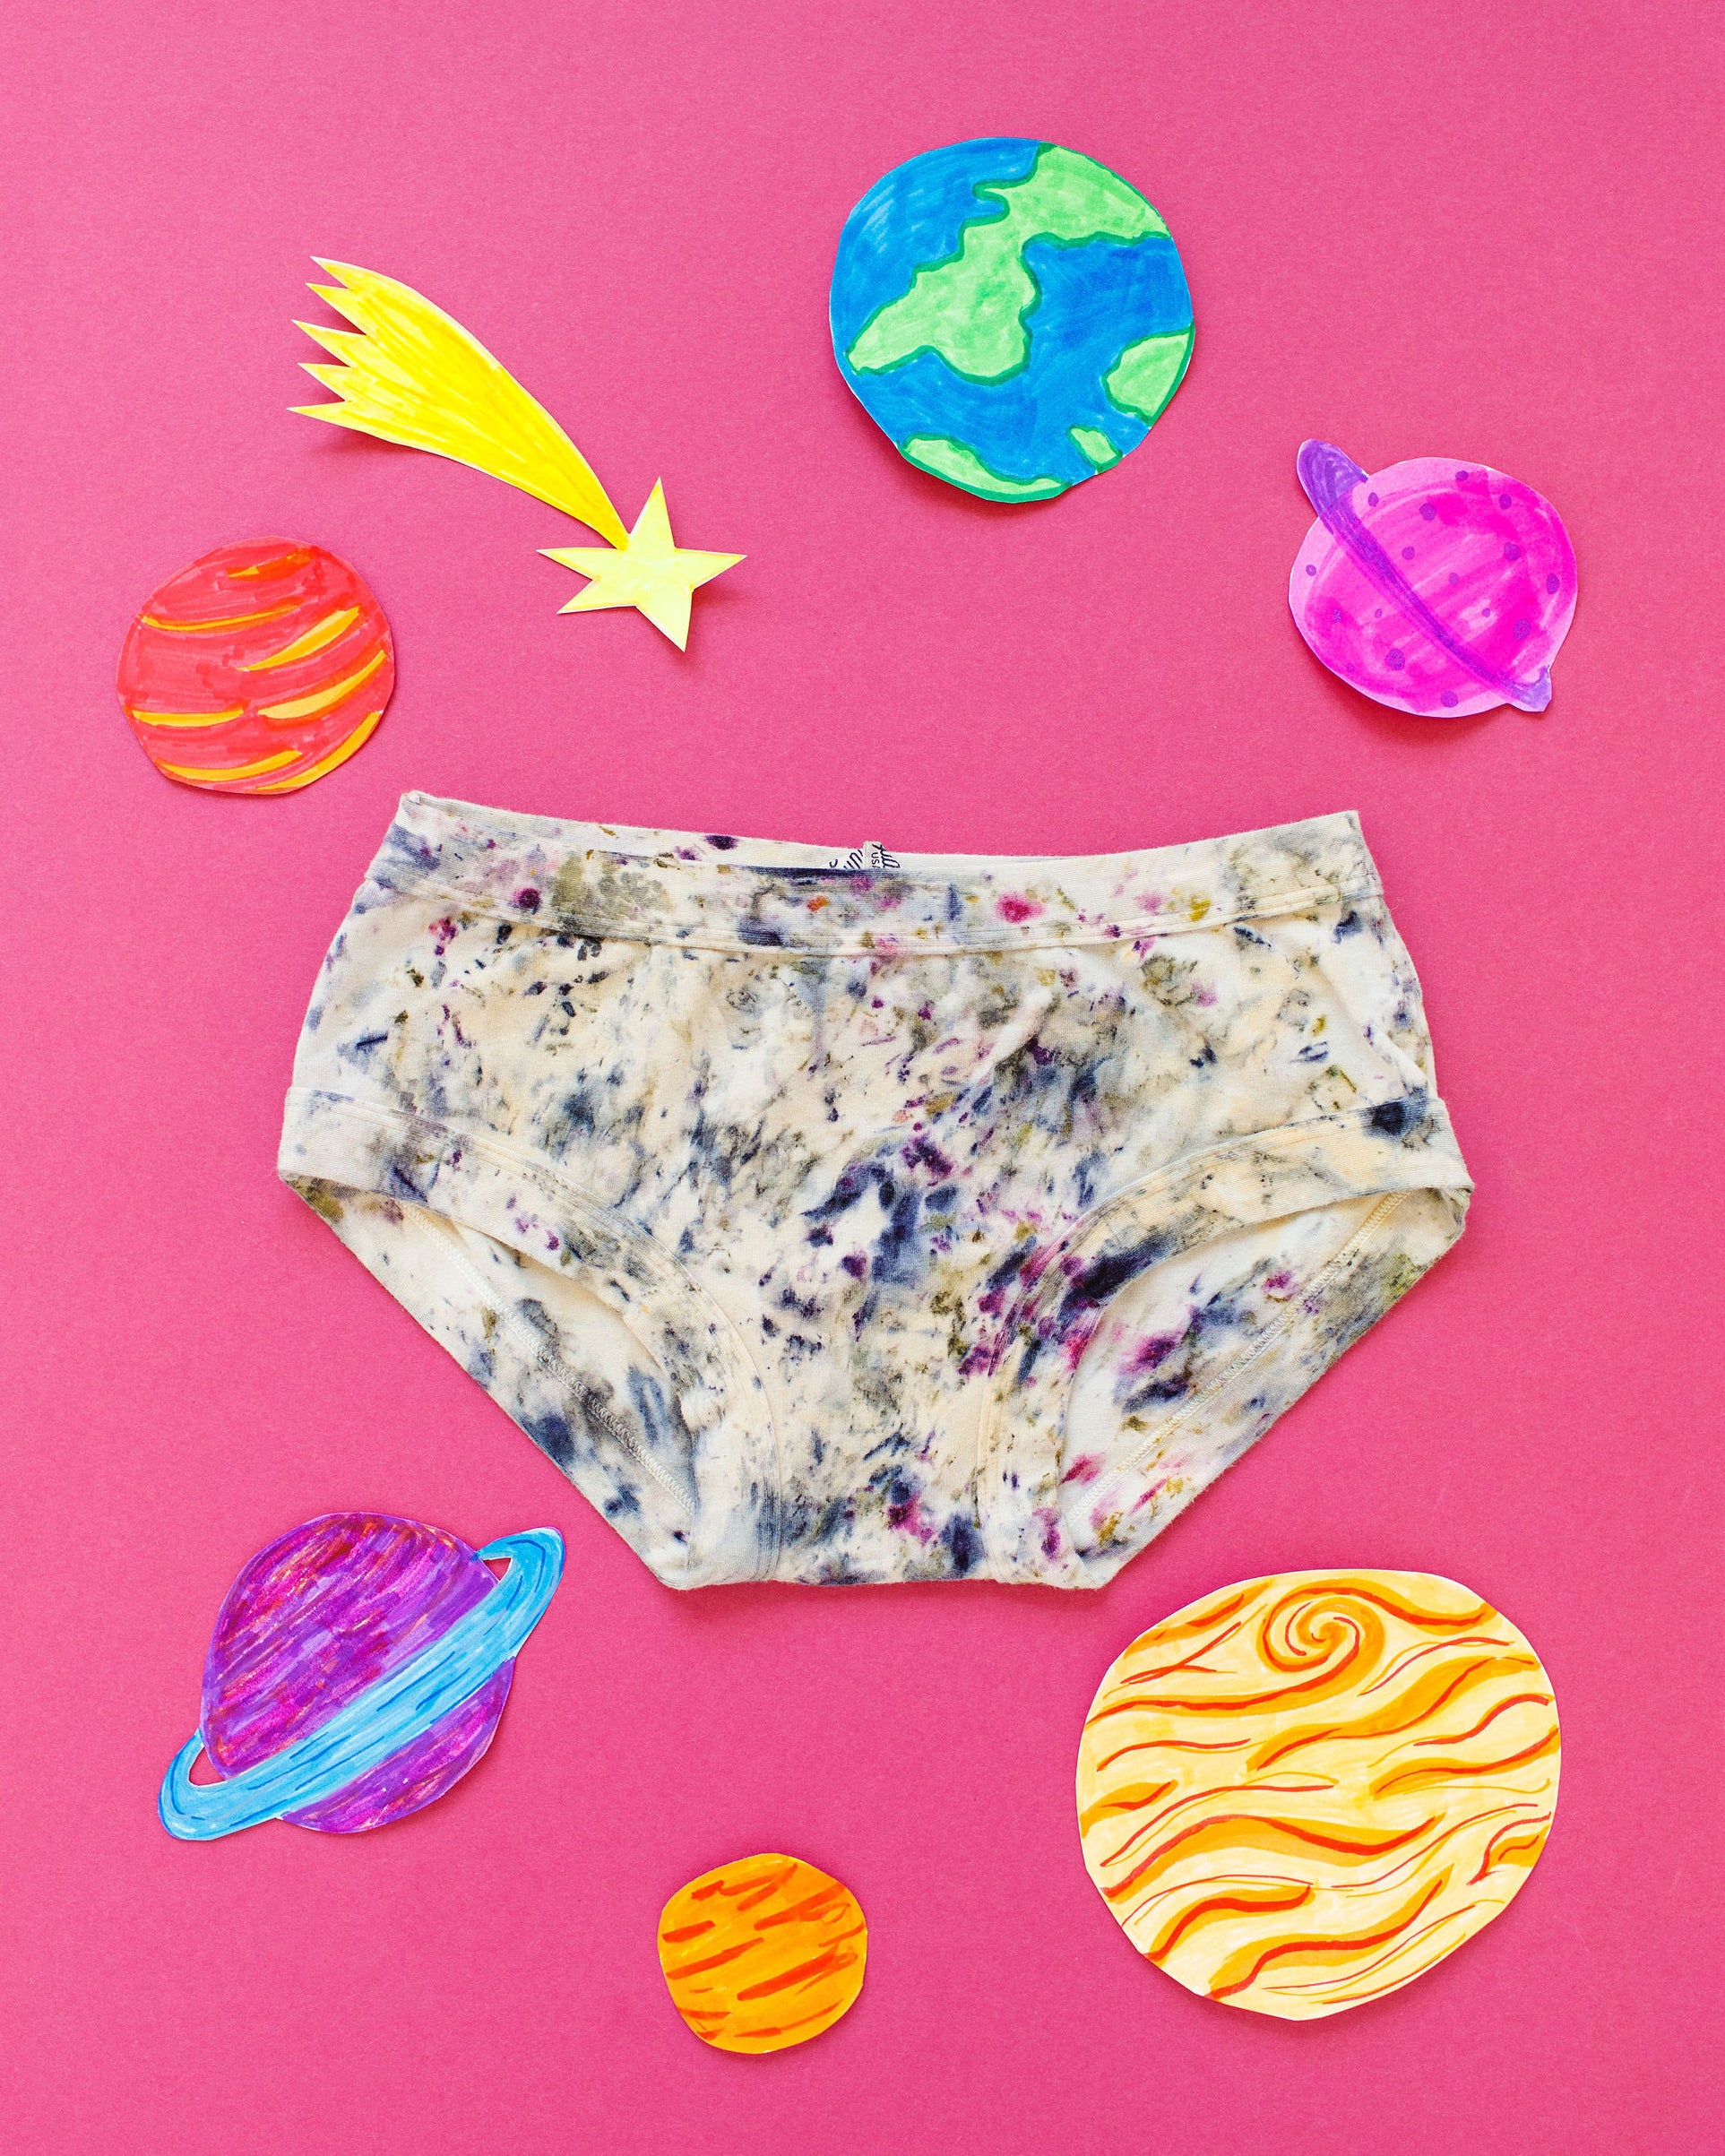 Flat lay of Thunderpants Hipster style underwear in Cosmic Compost hand dye.